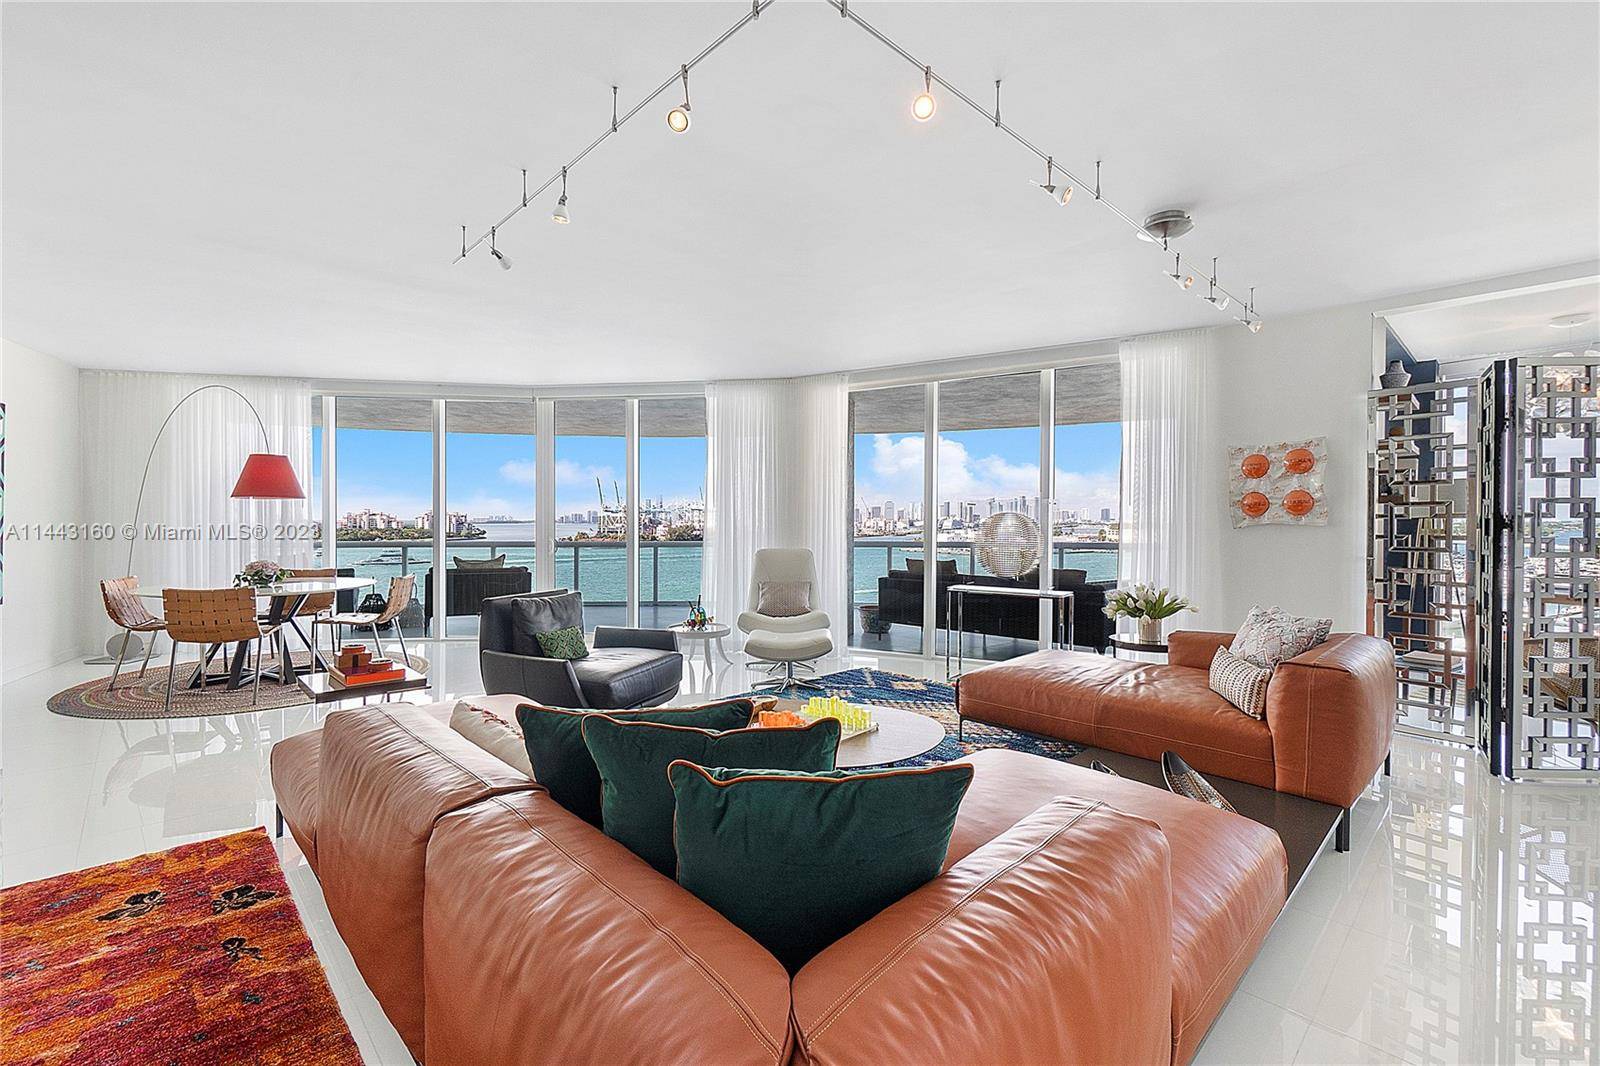 Experience one of a kind indulgence in this rare corner unit showcasing dramatic views of Biscayne Bay, Fisher Island, South Beach, and the glittering Miami cityscape.